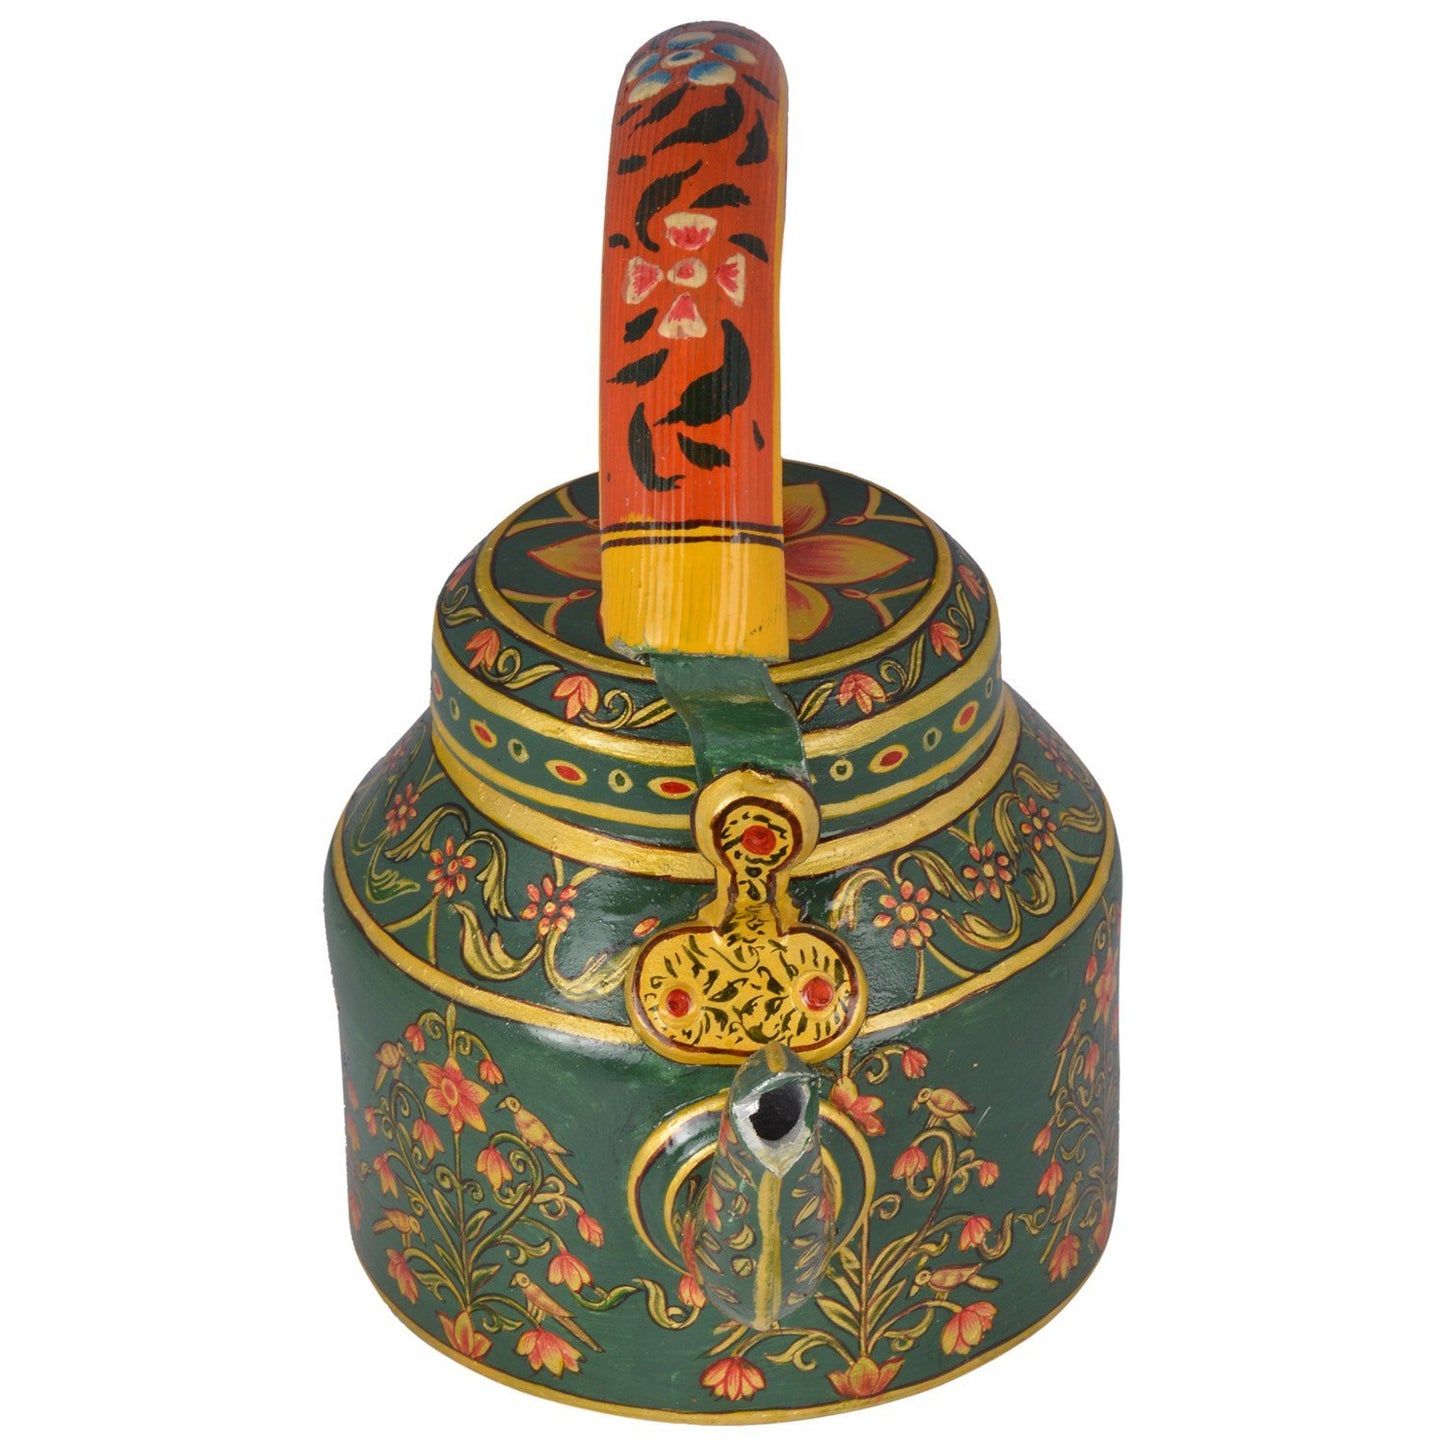 Hand Painted Kettle : The royal Palace